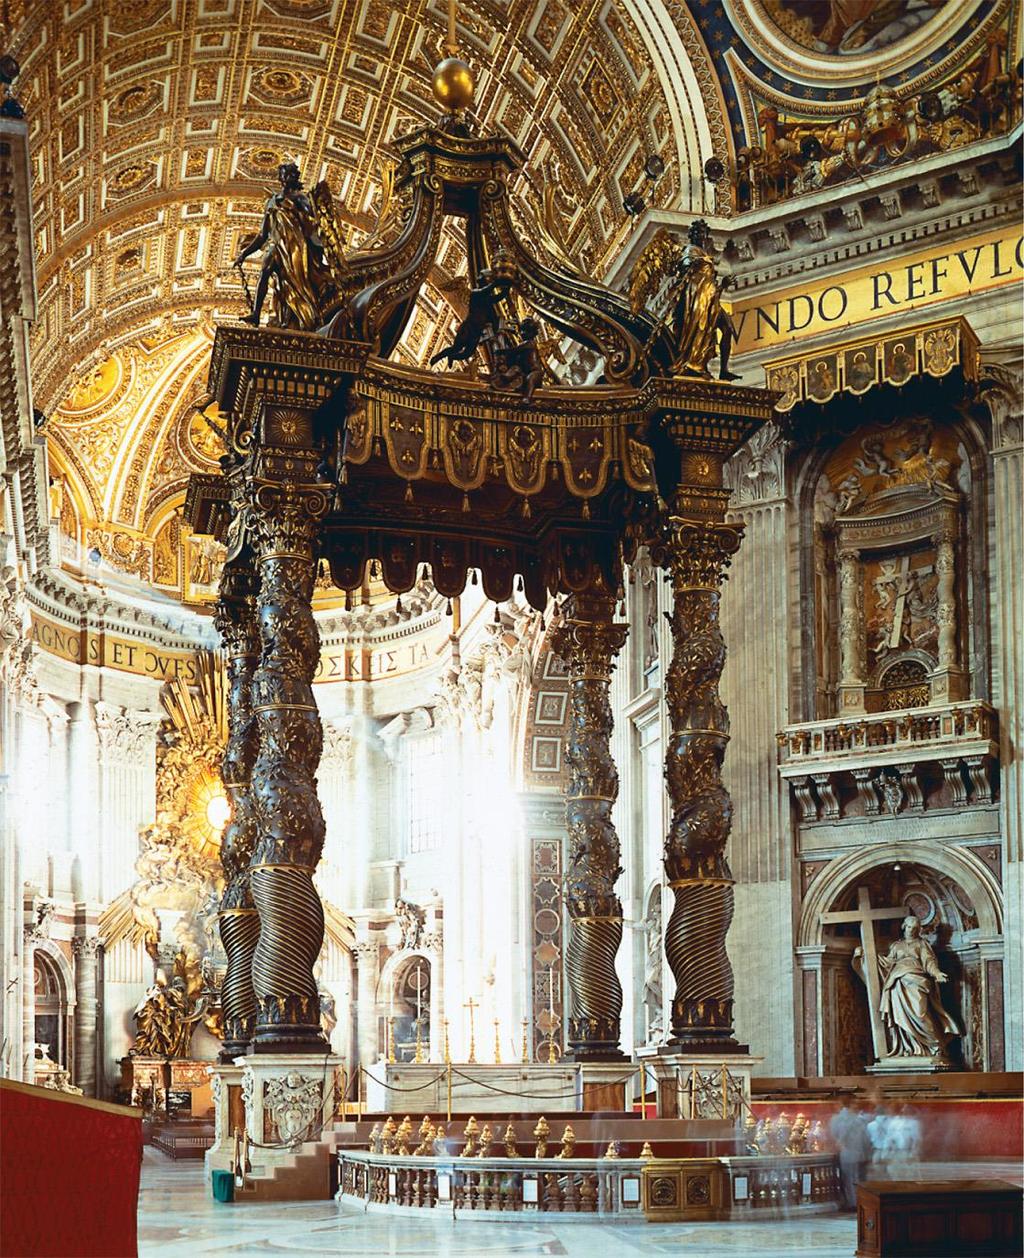 Bernini designed the elaborate Baldacchino that stands under the dome of St.